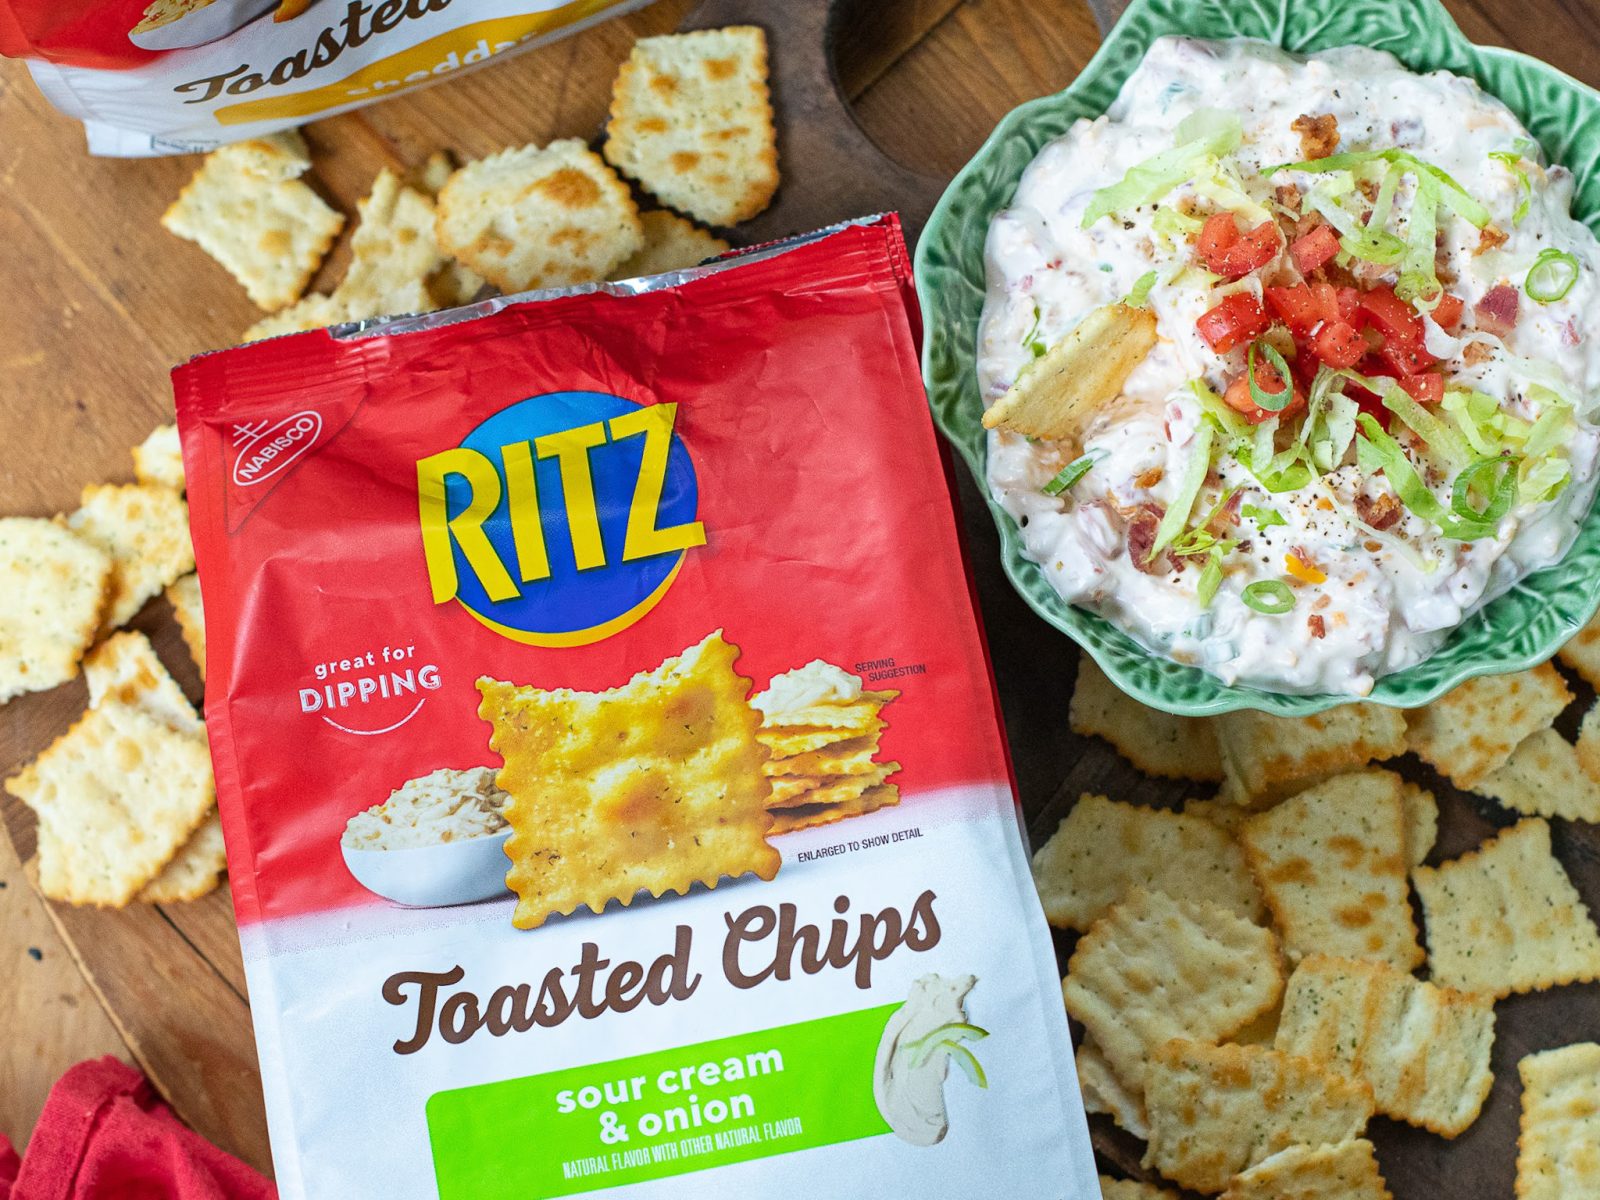 Ritz Toasted Chips As Low As $2.29 At Kroger (Regular Price $4.29)